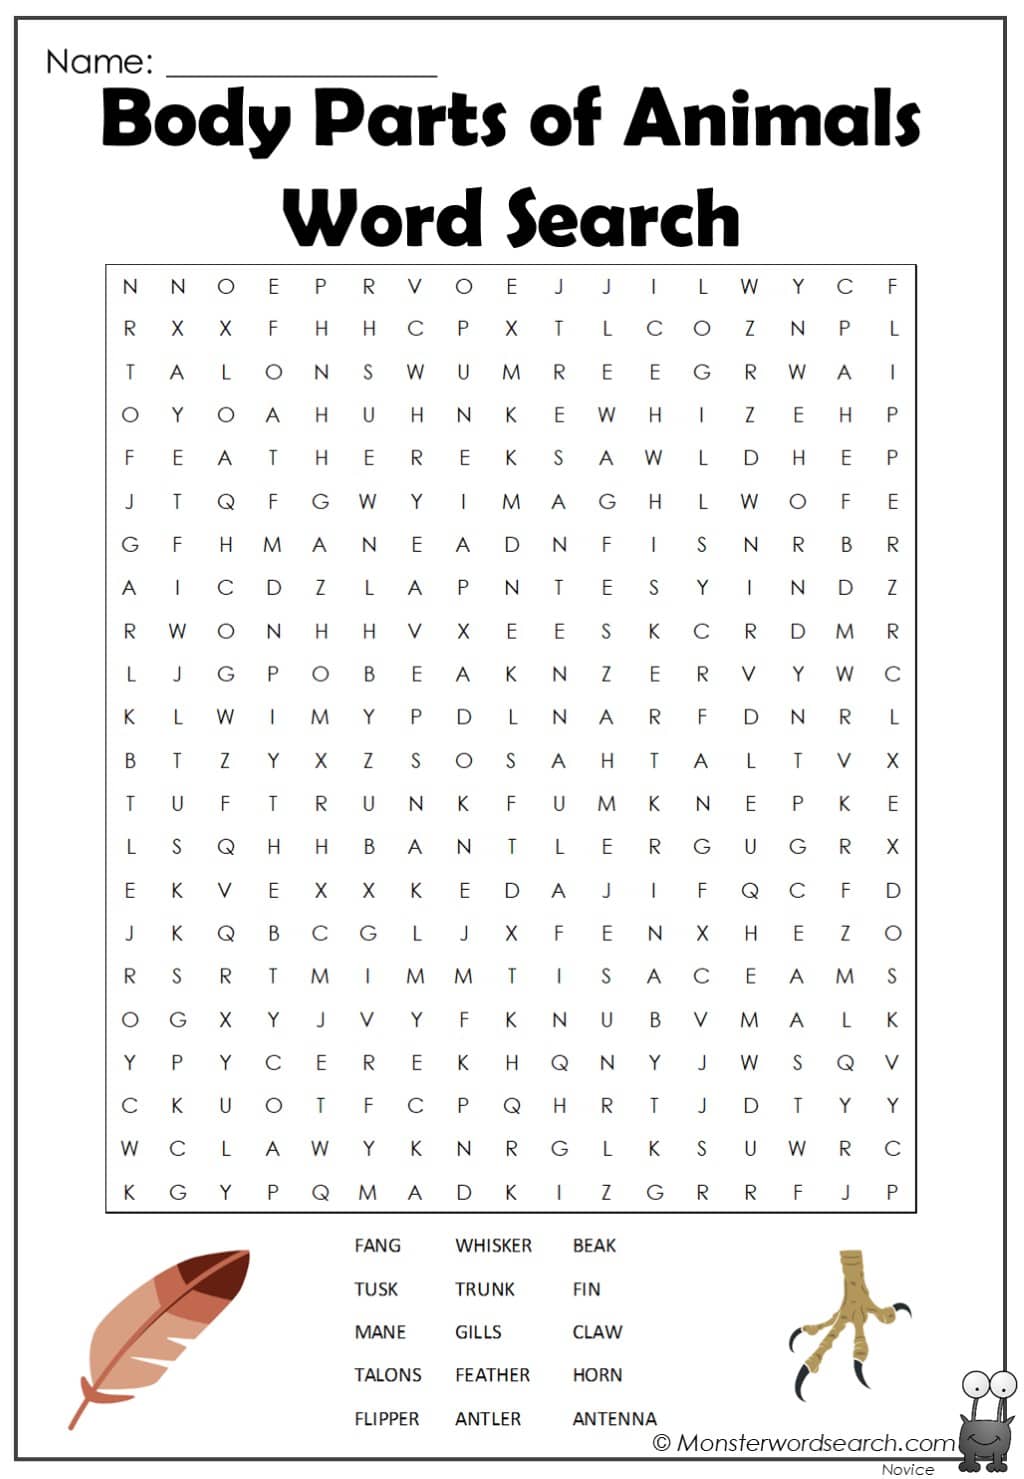 Body Parts of Animals Word Search- Monster Word Search